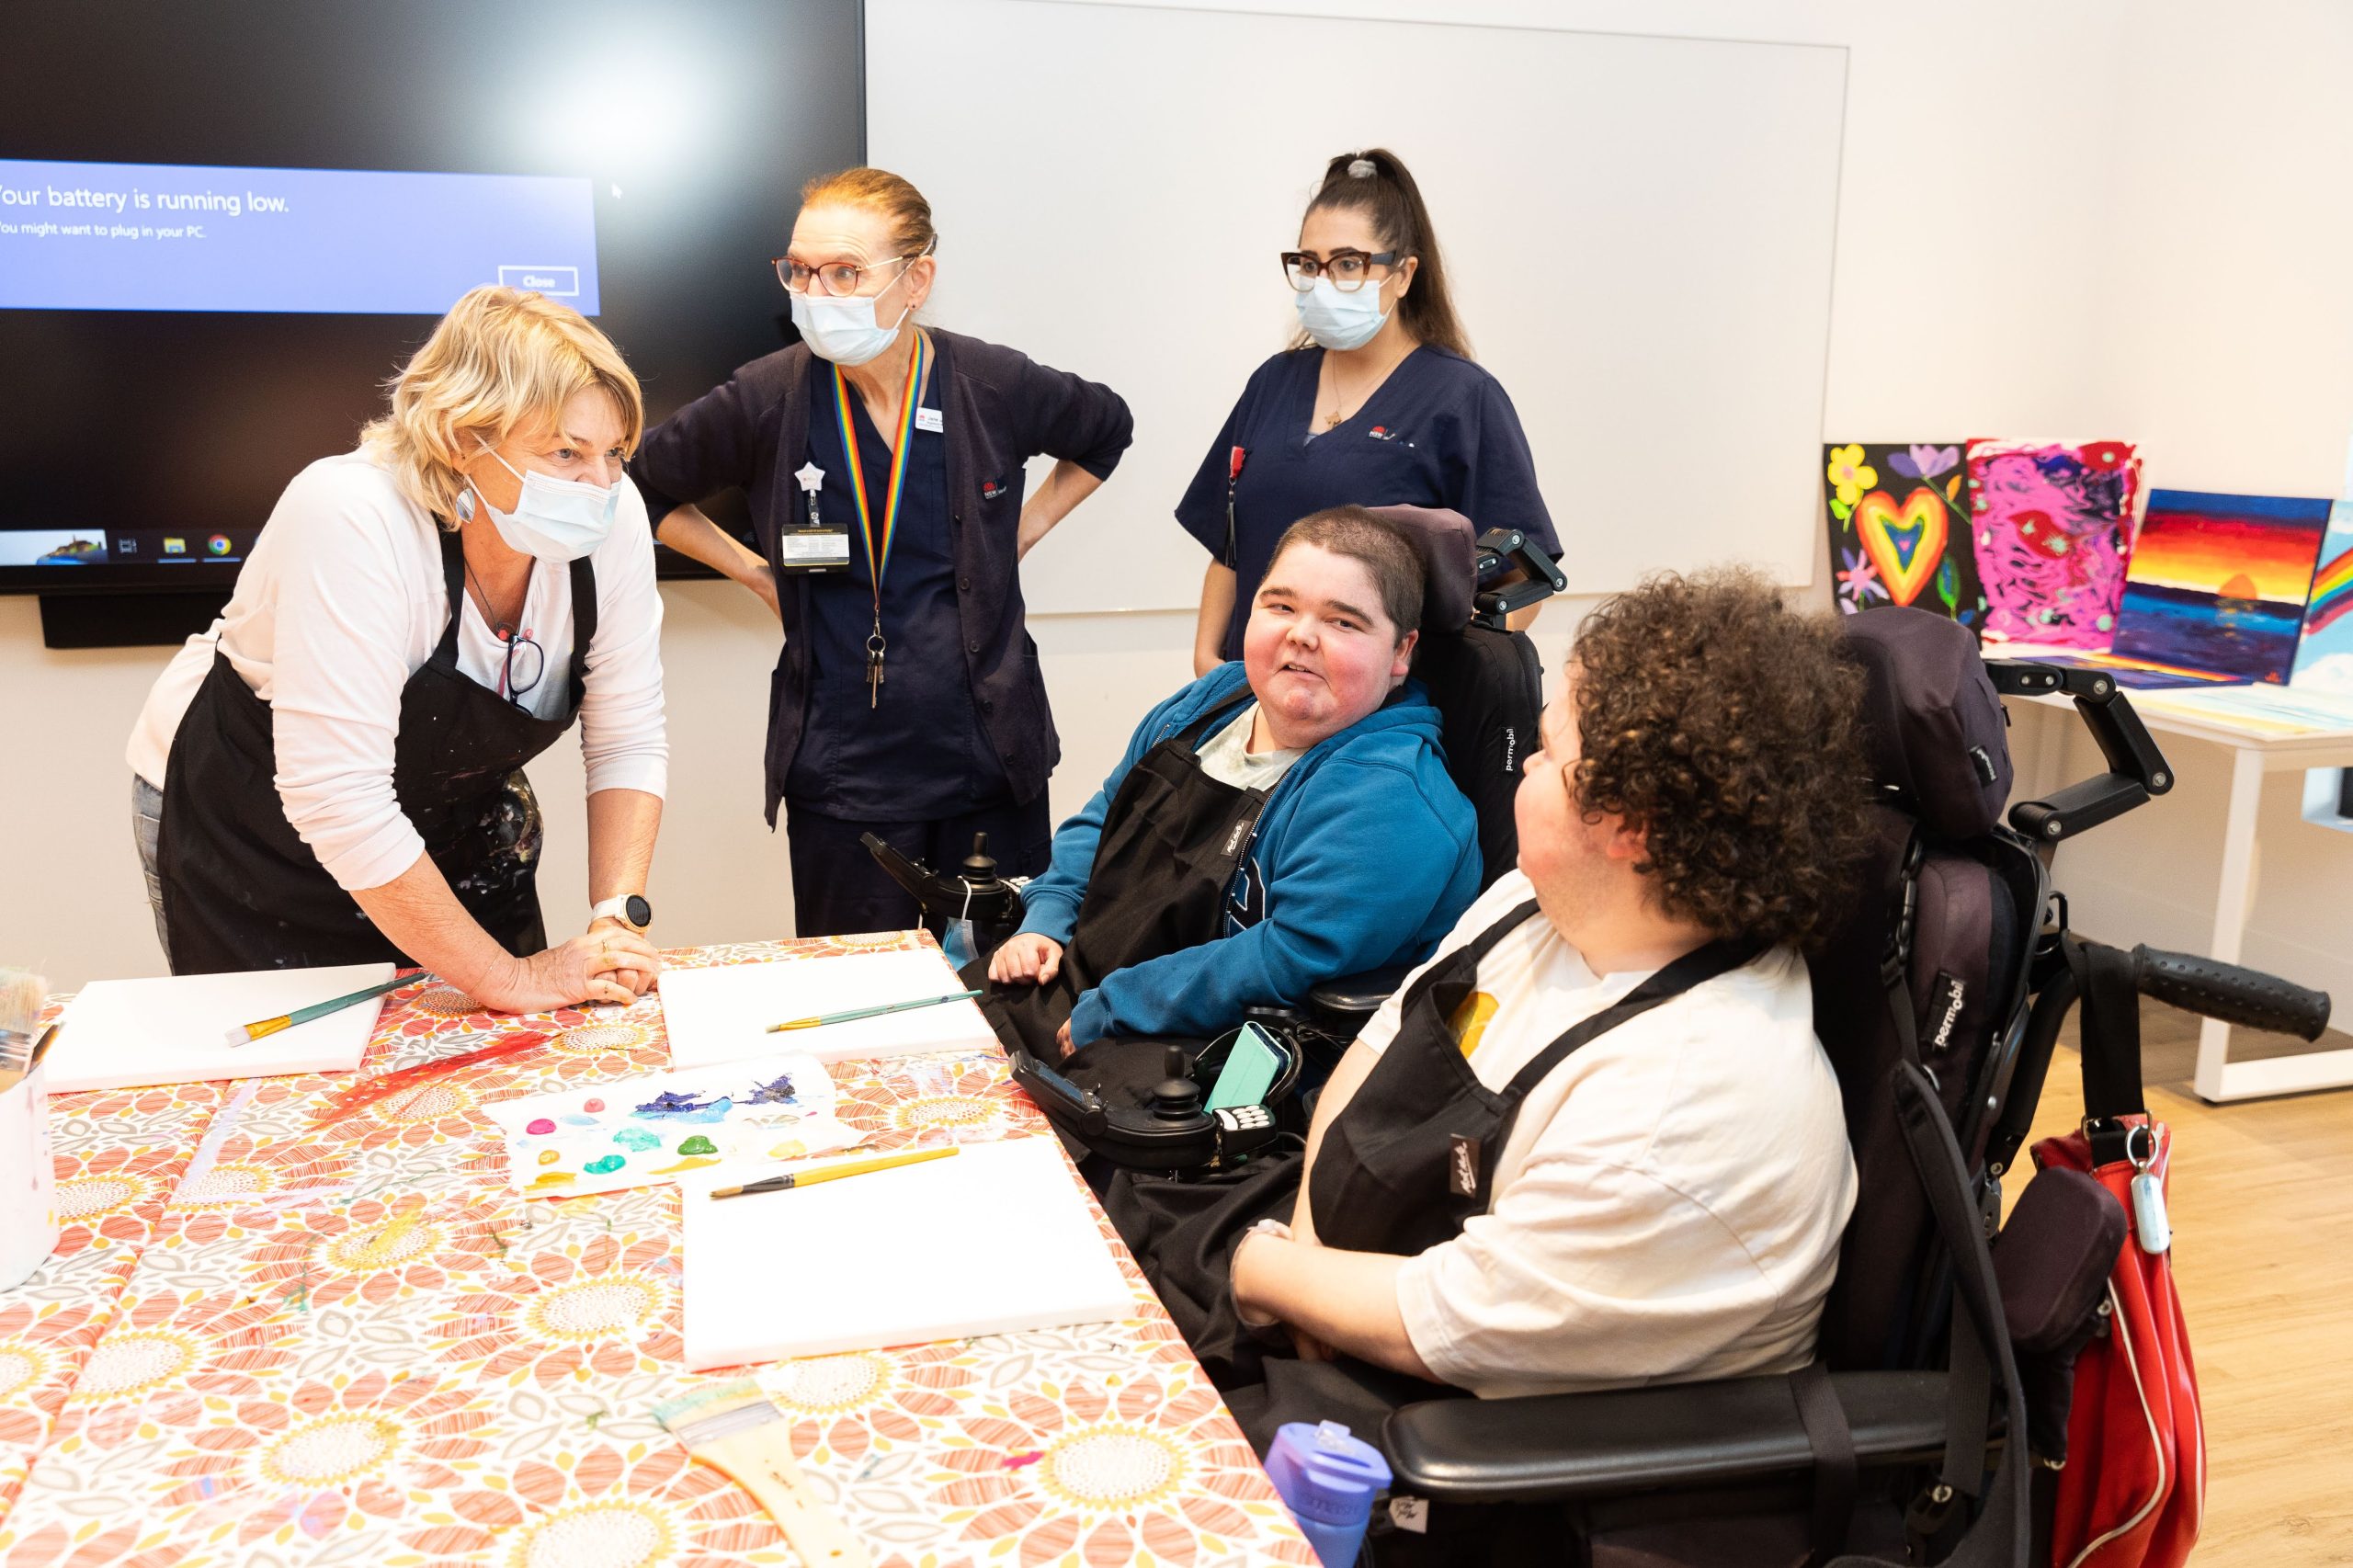 Art therapist Georgina Hart and patients getting creative in the art space